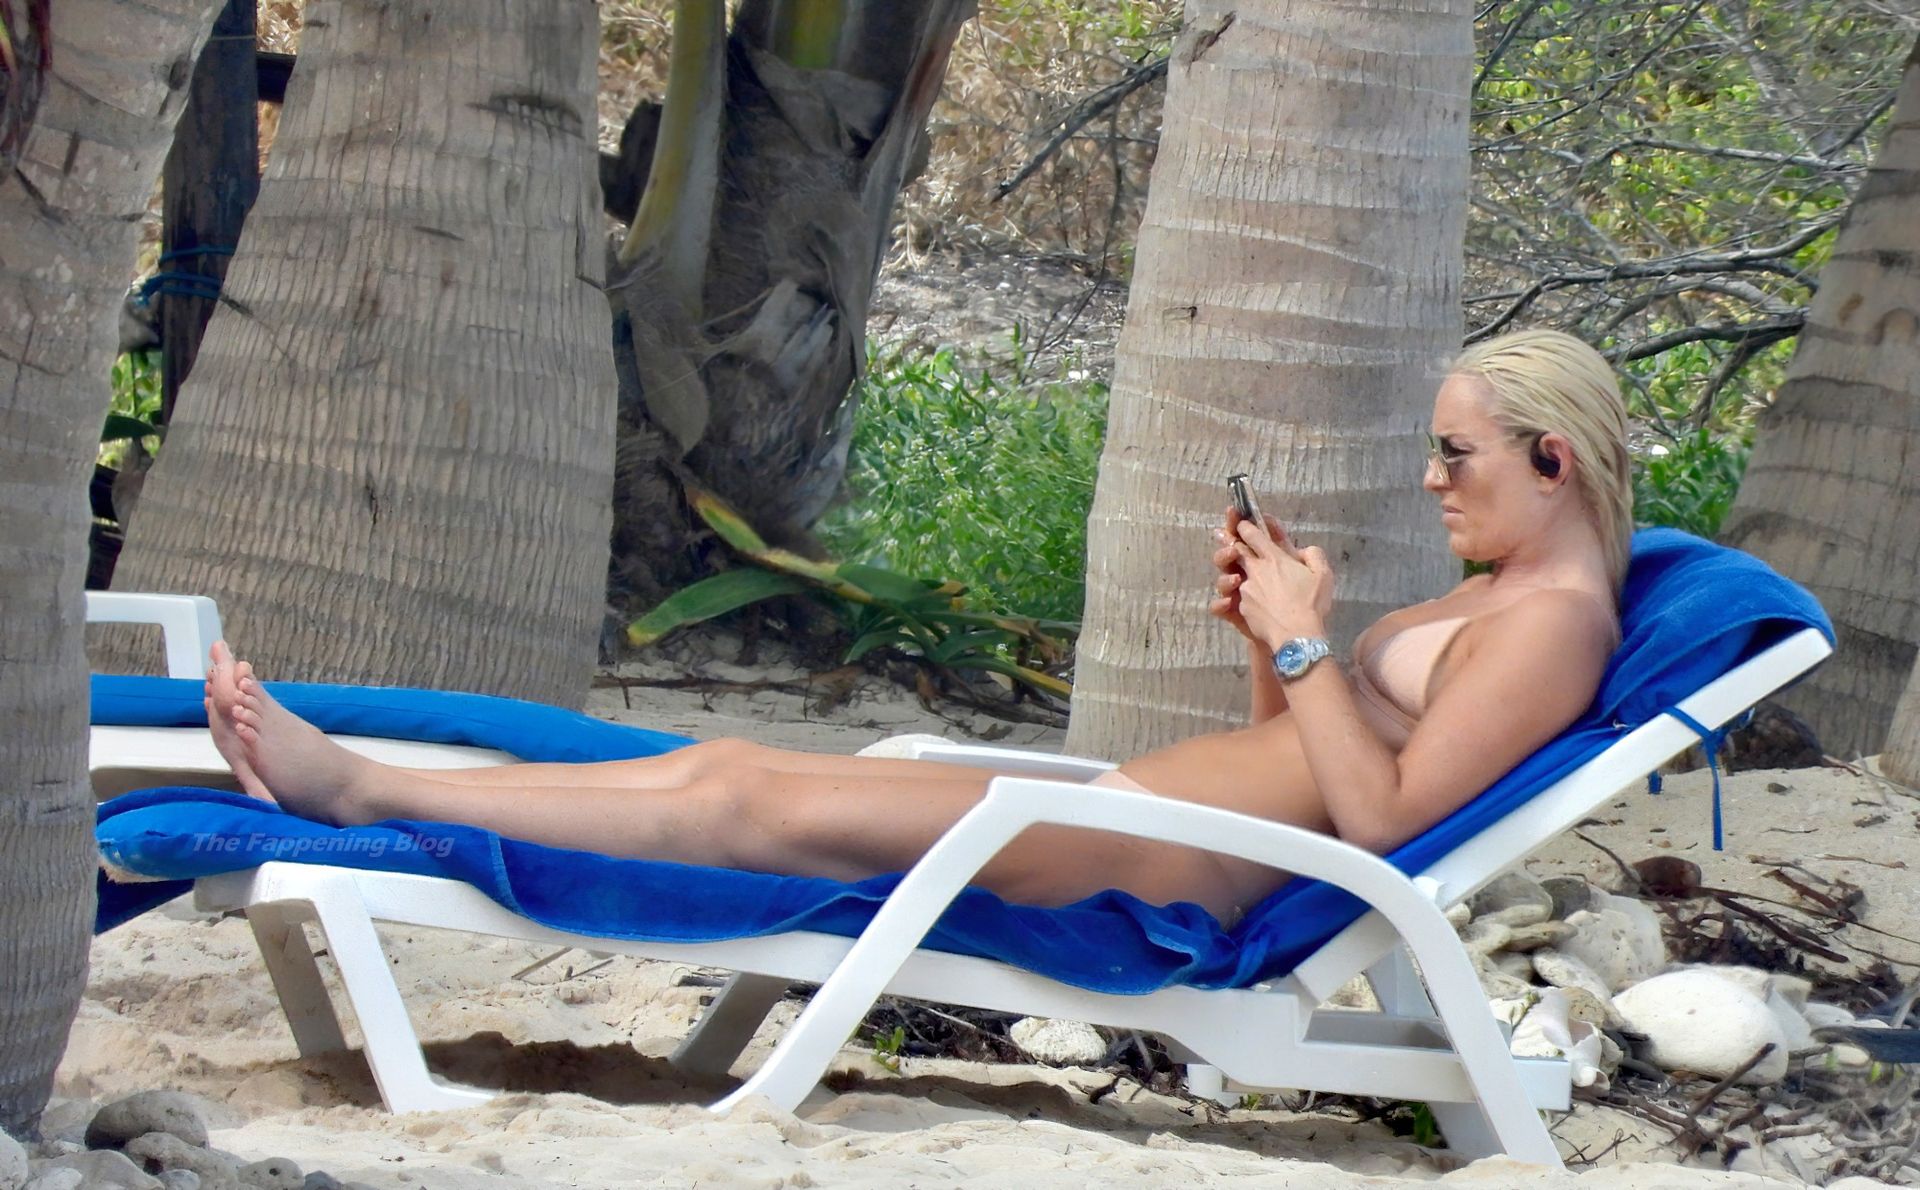 Linds
ey Vonn Shows Off Her Stunning Figure on the Beach in Tulum (96 Photos)